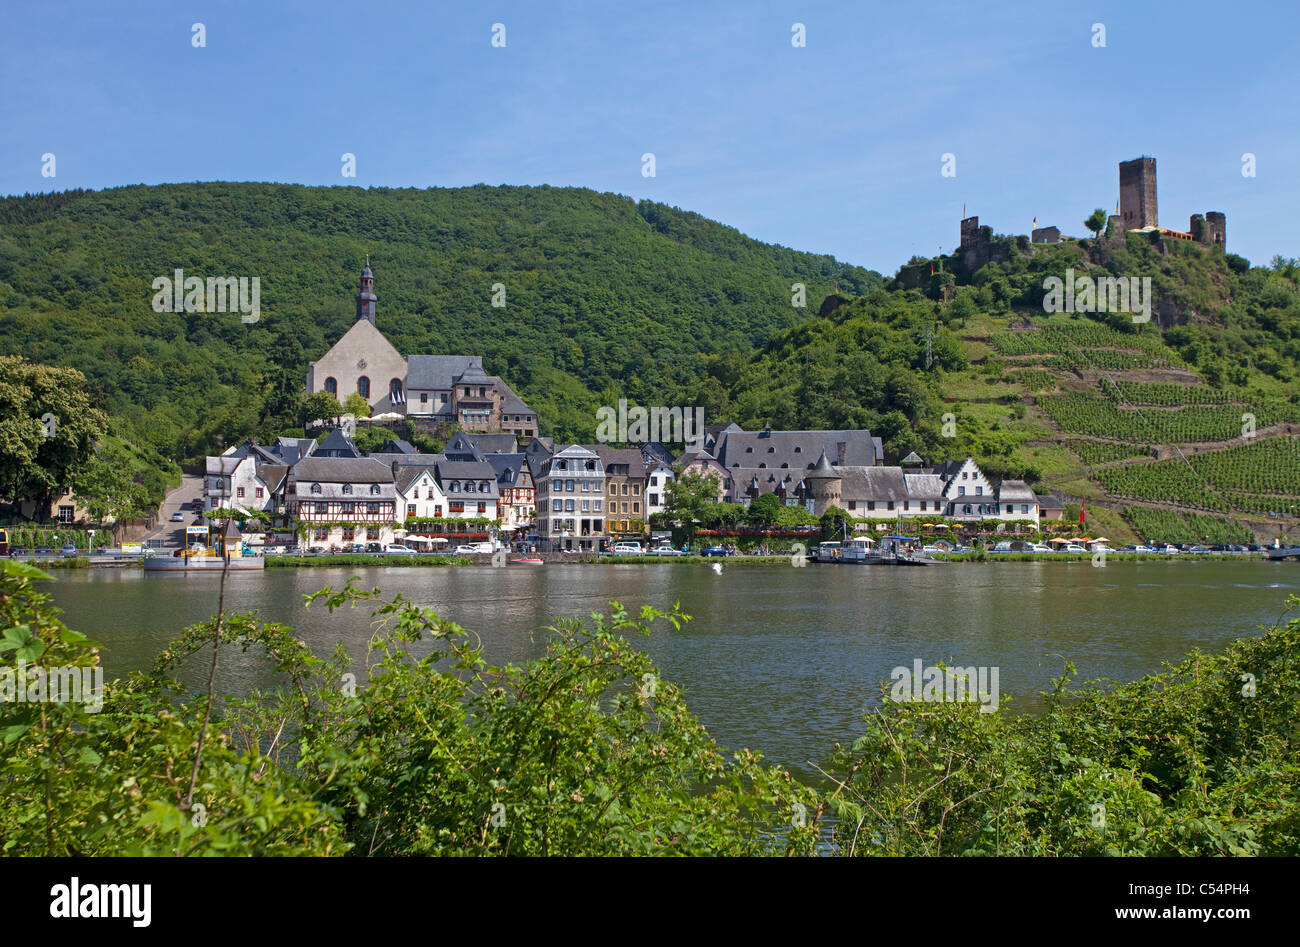 The village Beilstein, right side the fortress ruin Metternich, Mosel River, Moselle, Rhineland-Palatinate, Germany, Europe Stock Photo